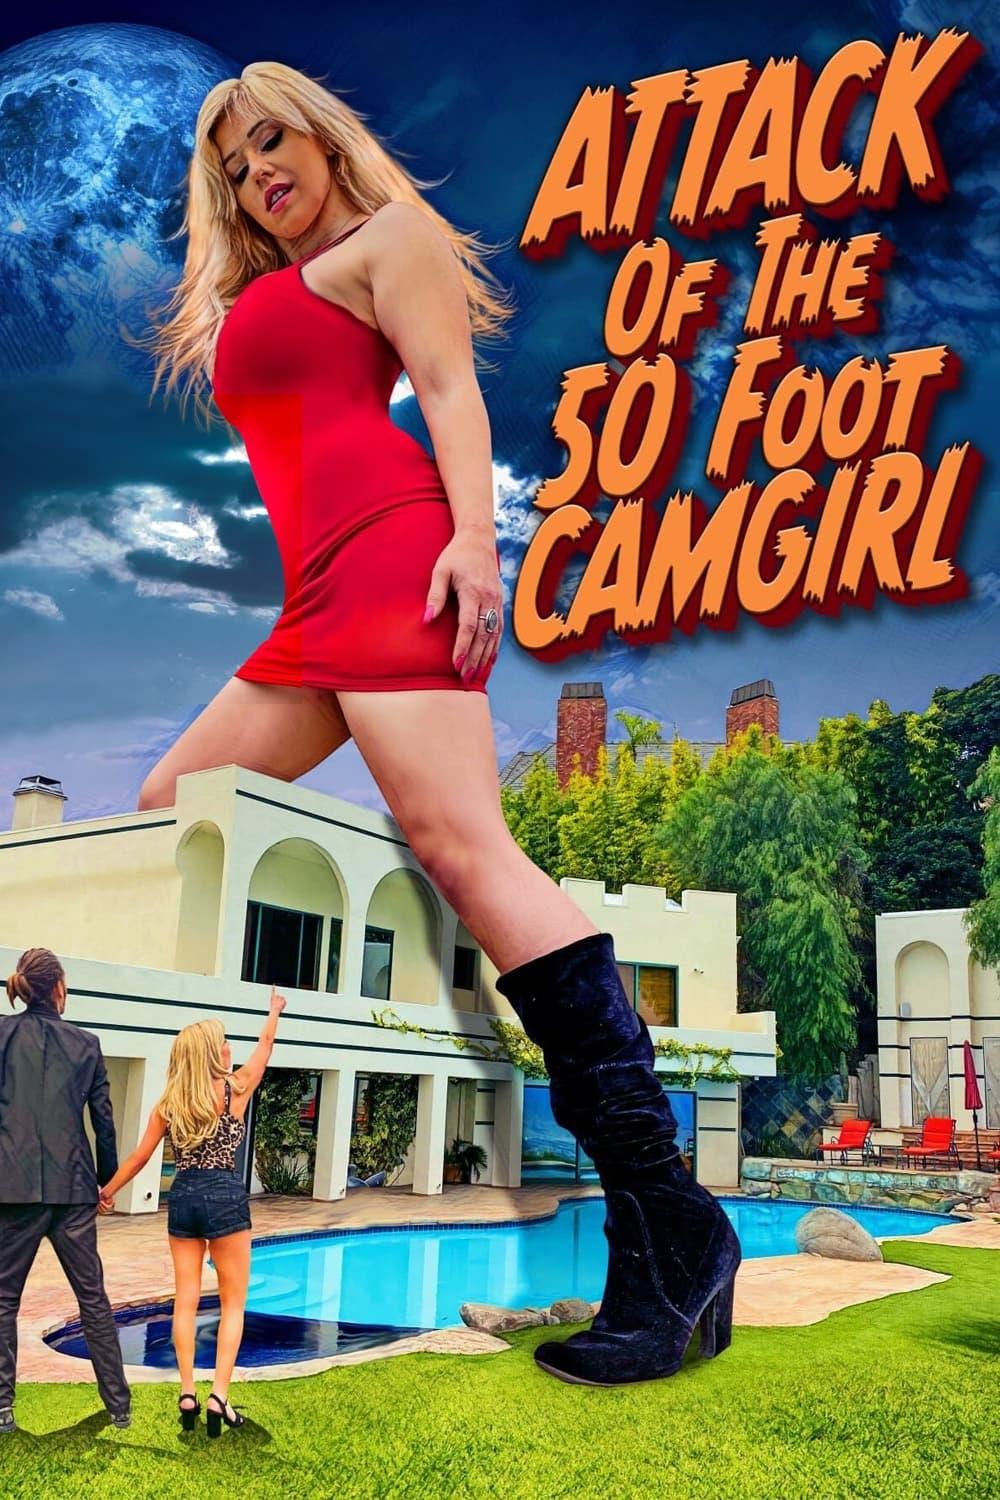 Attack of the 50 Foot Camgirl poster